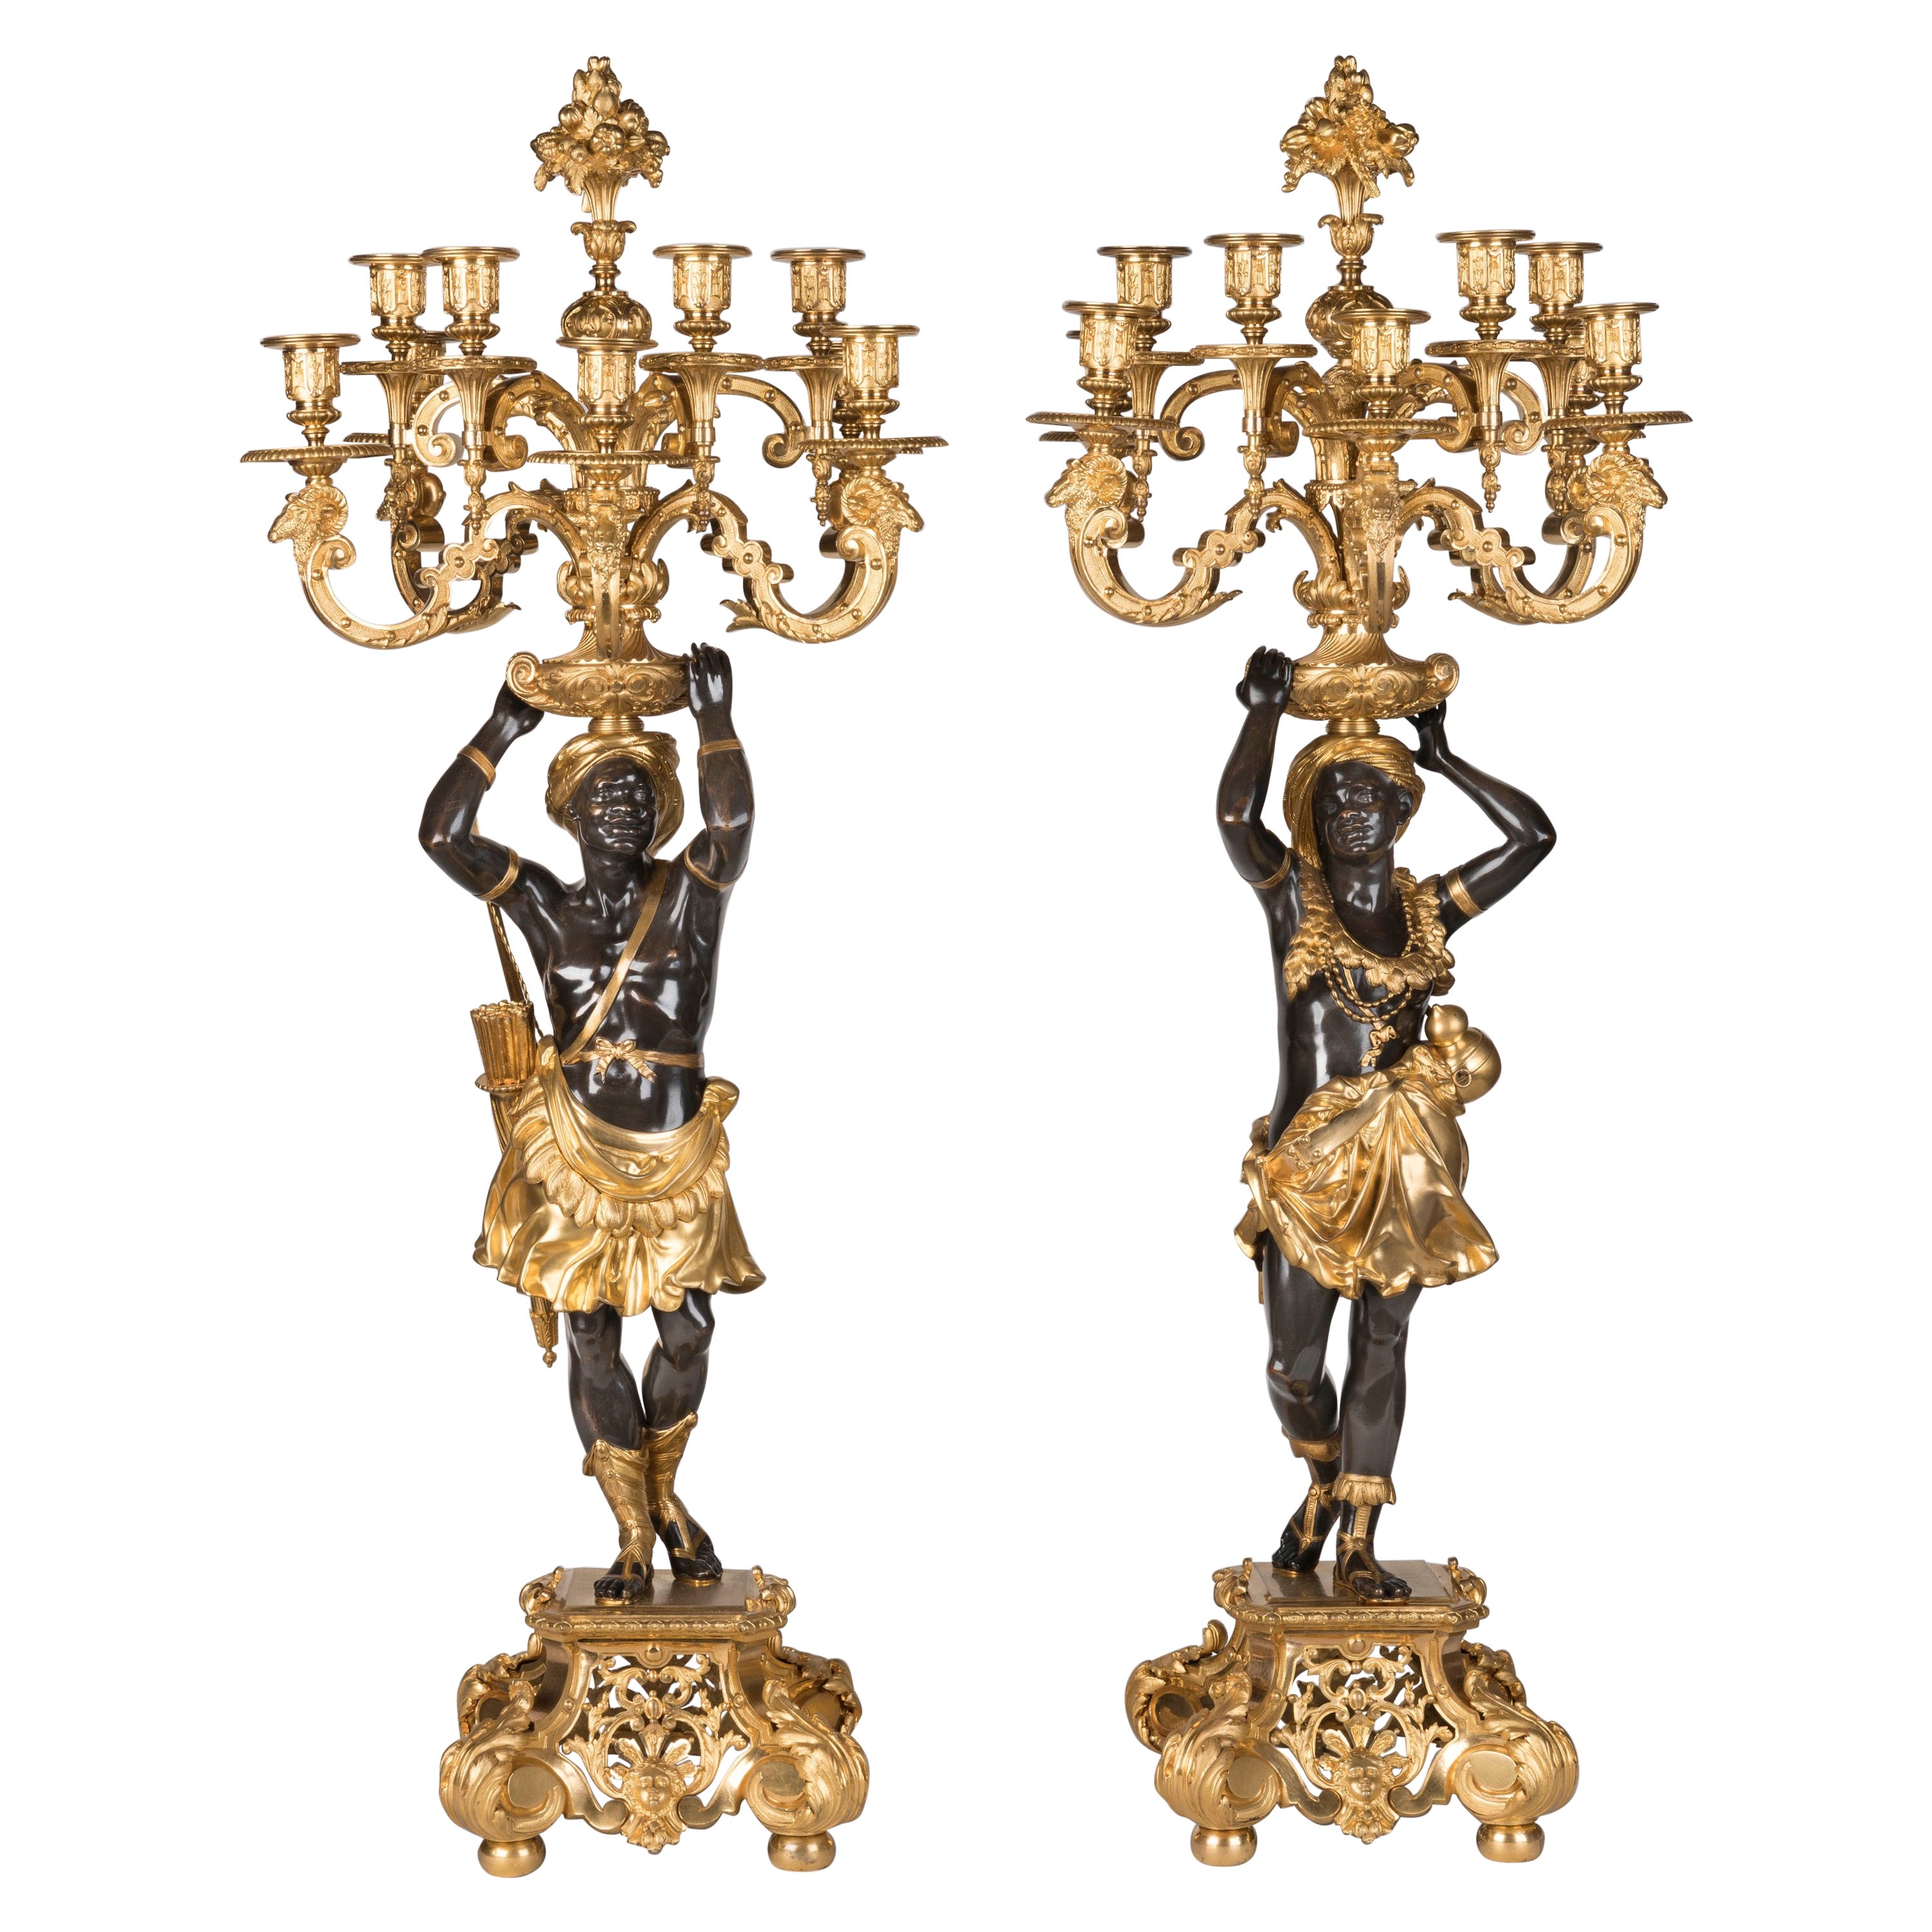 Pair of Large 19th Century Bronze and Gilded Figural Candelabra by Denière For Sale